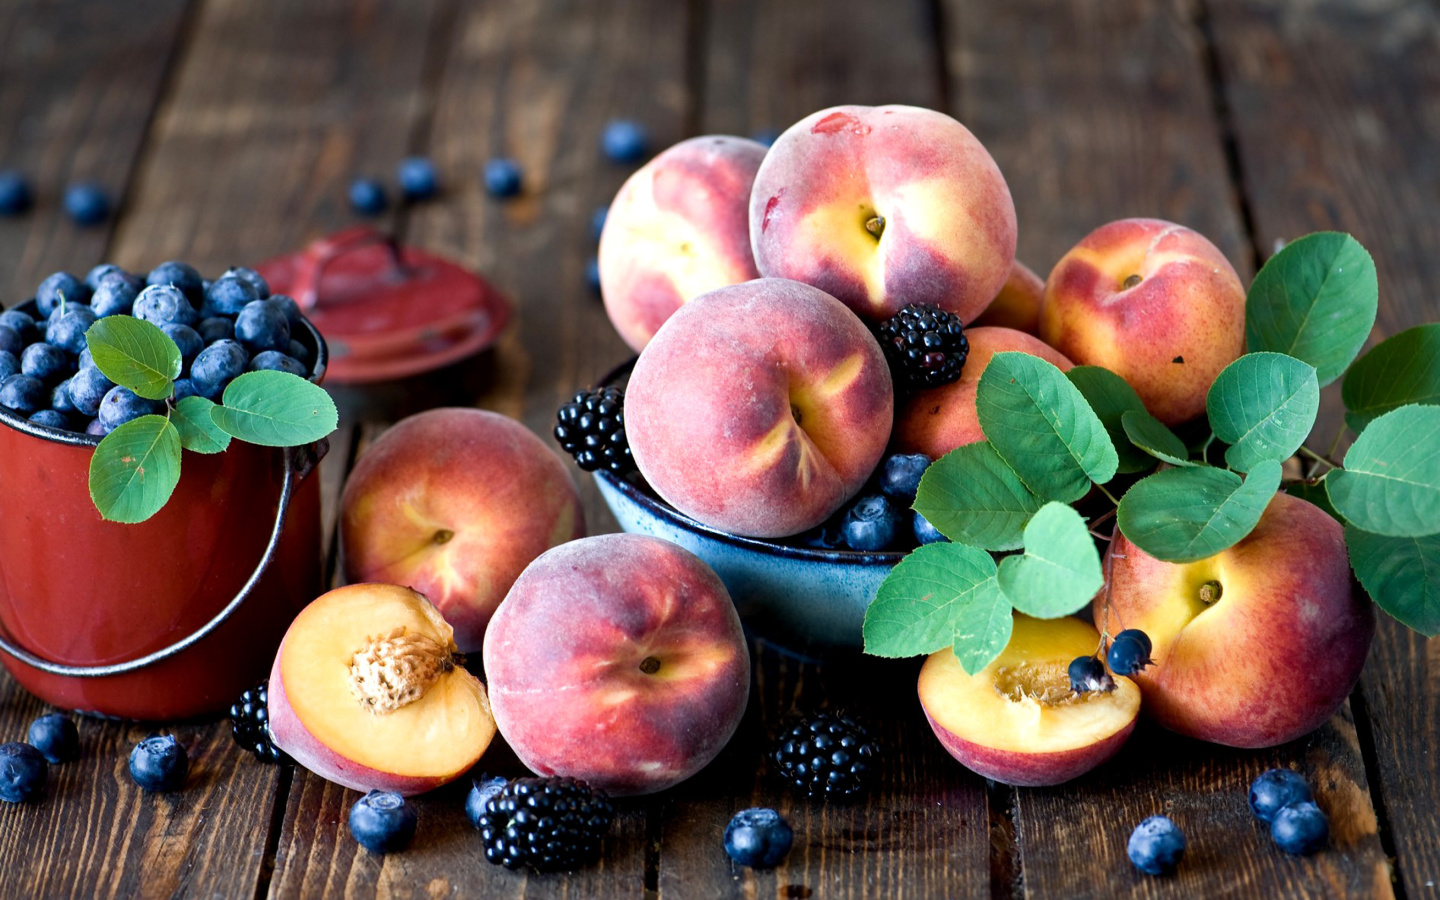 Blueberries and Peaches wallpaper 1440x900